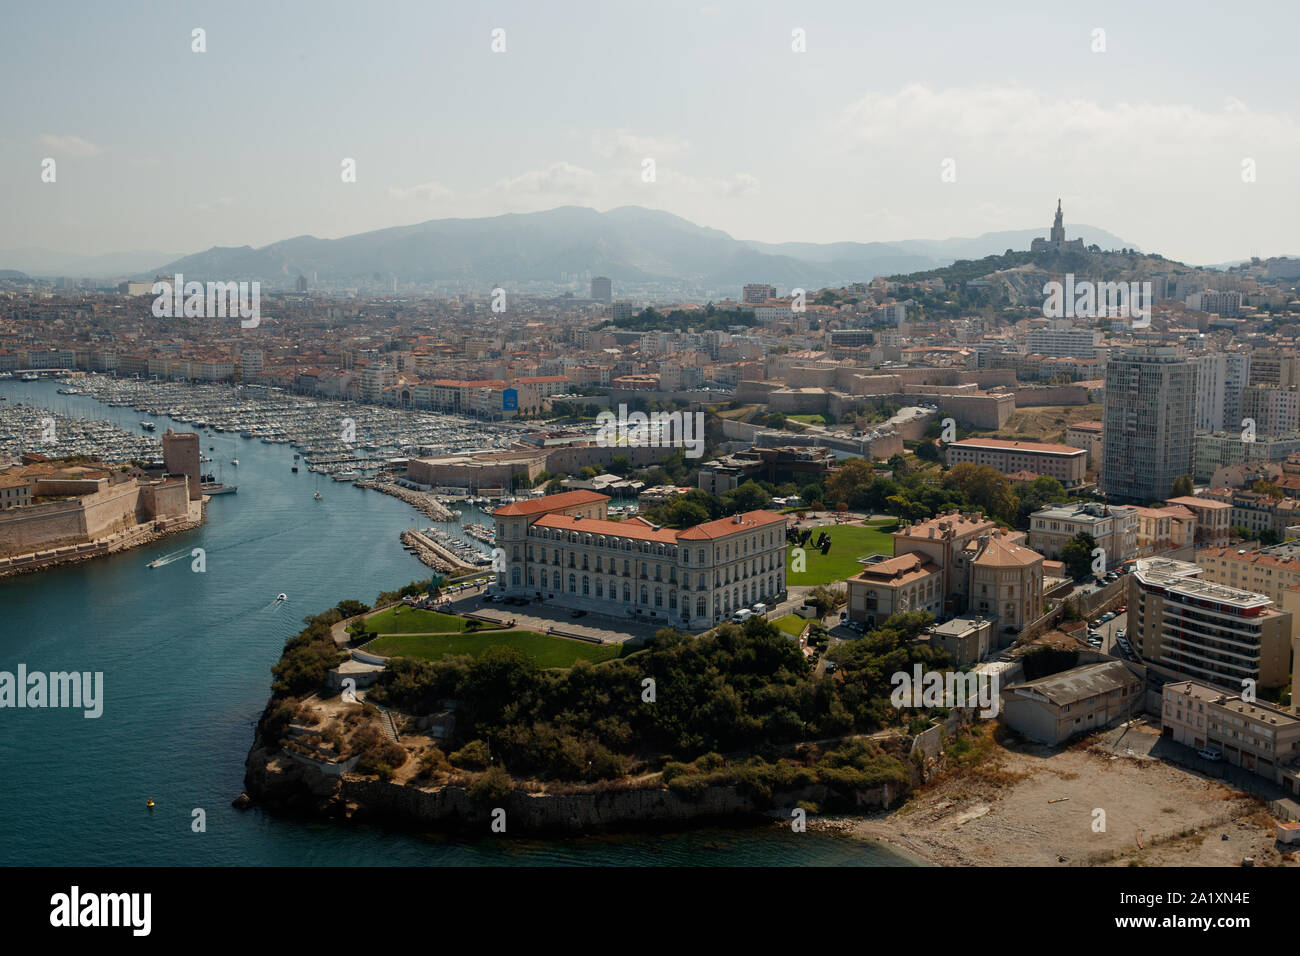 General View of Pharo Palace, the Notre-Dame de la Garde Basilica and the city of Marseille Stock Photo